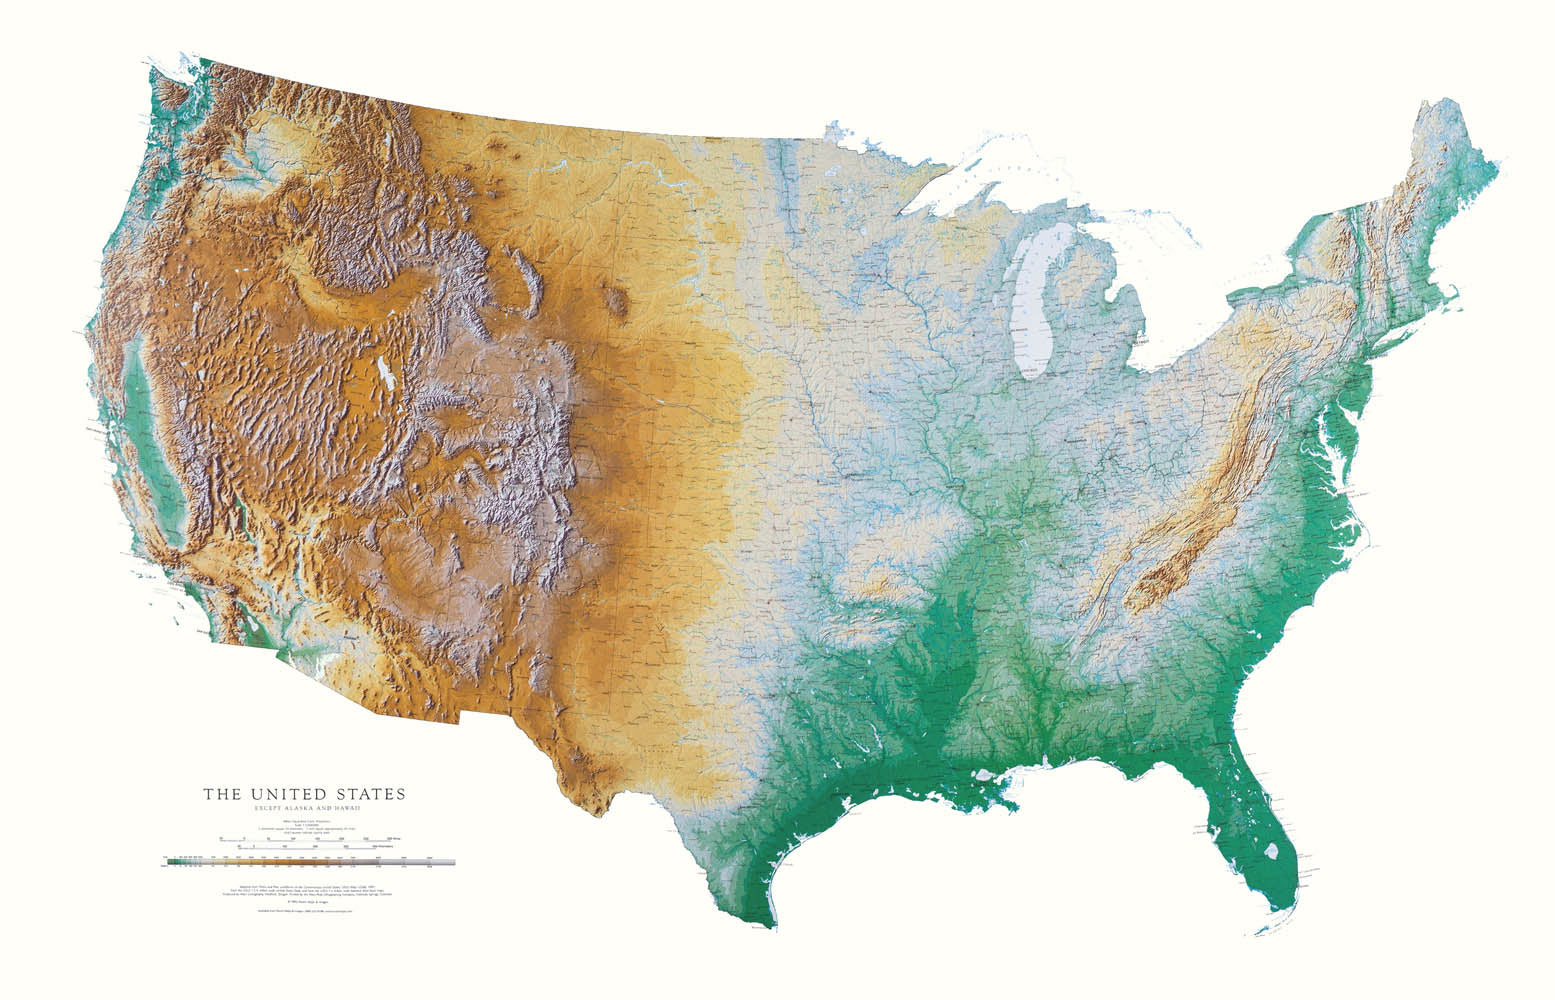 United States - Elevation Tints Map - Elevation Tints is the classic Raven Wall Map. It uses shaded relief to portray the land and combines shading with elevation tints-- a sequence of delicate hues and colors that portrays landforms--much more clearly than the abstraction of contour lines. Elevation colors make mountains, highlands, and valleys immediately obvious.